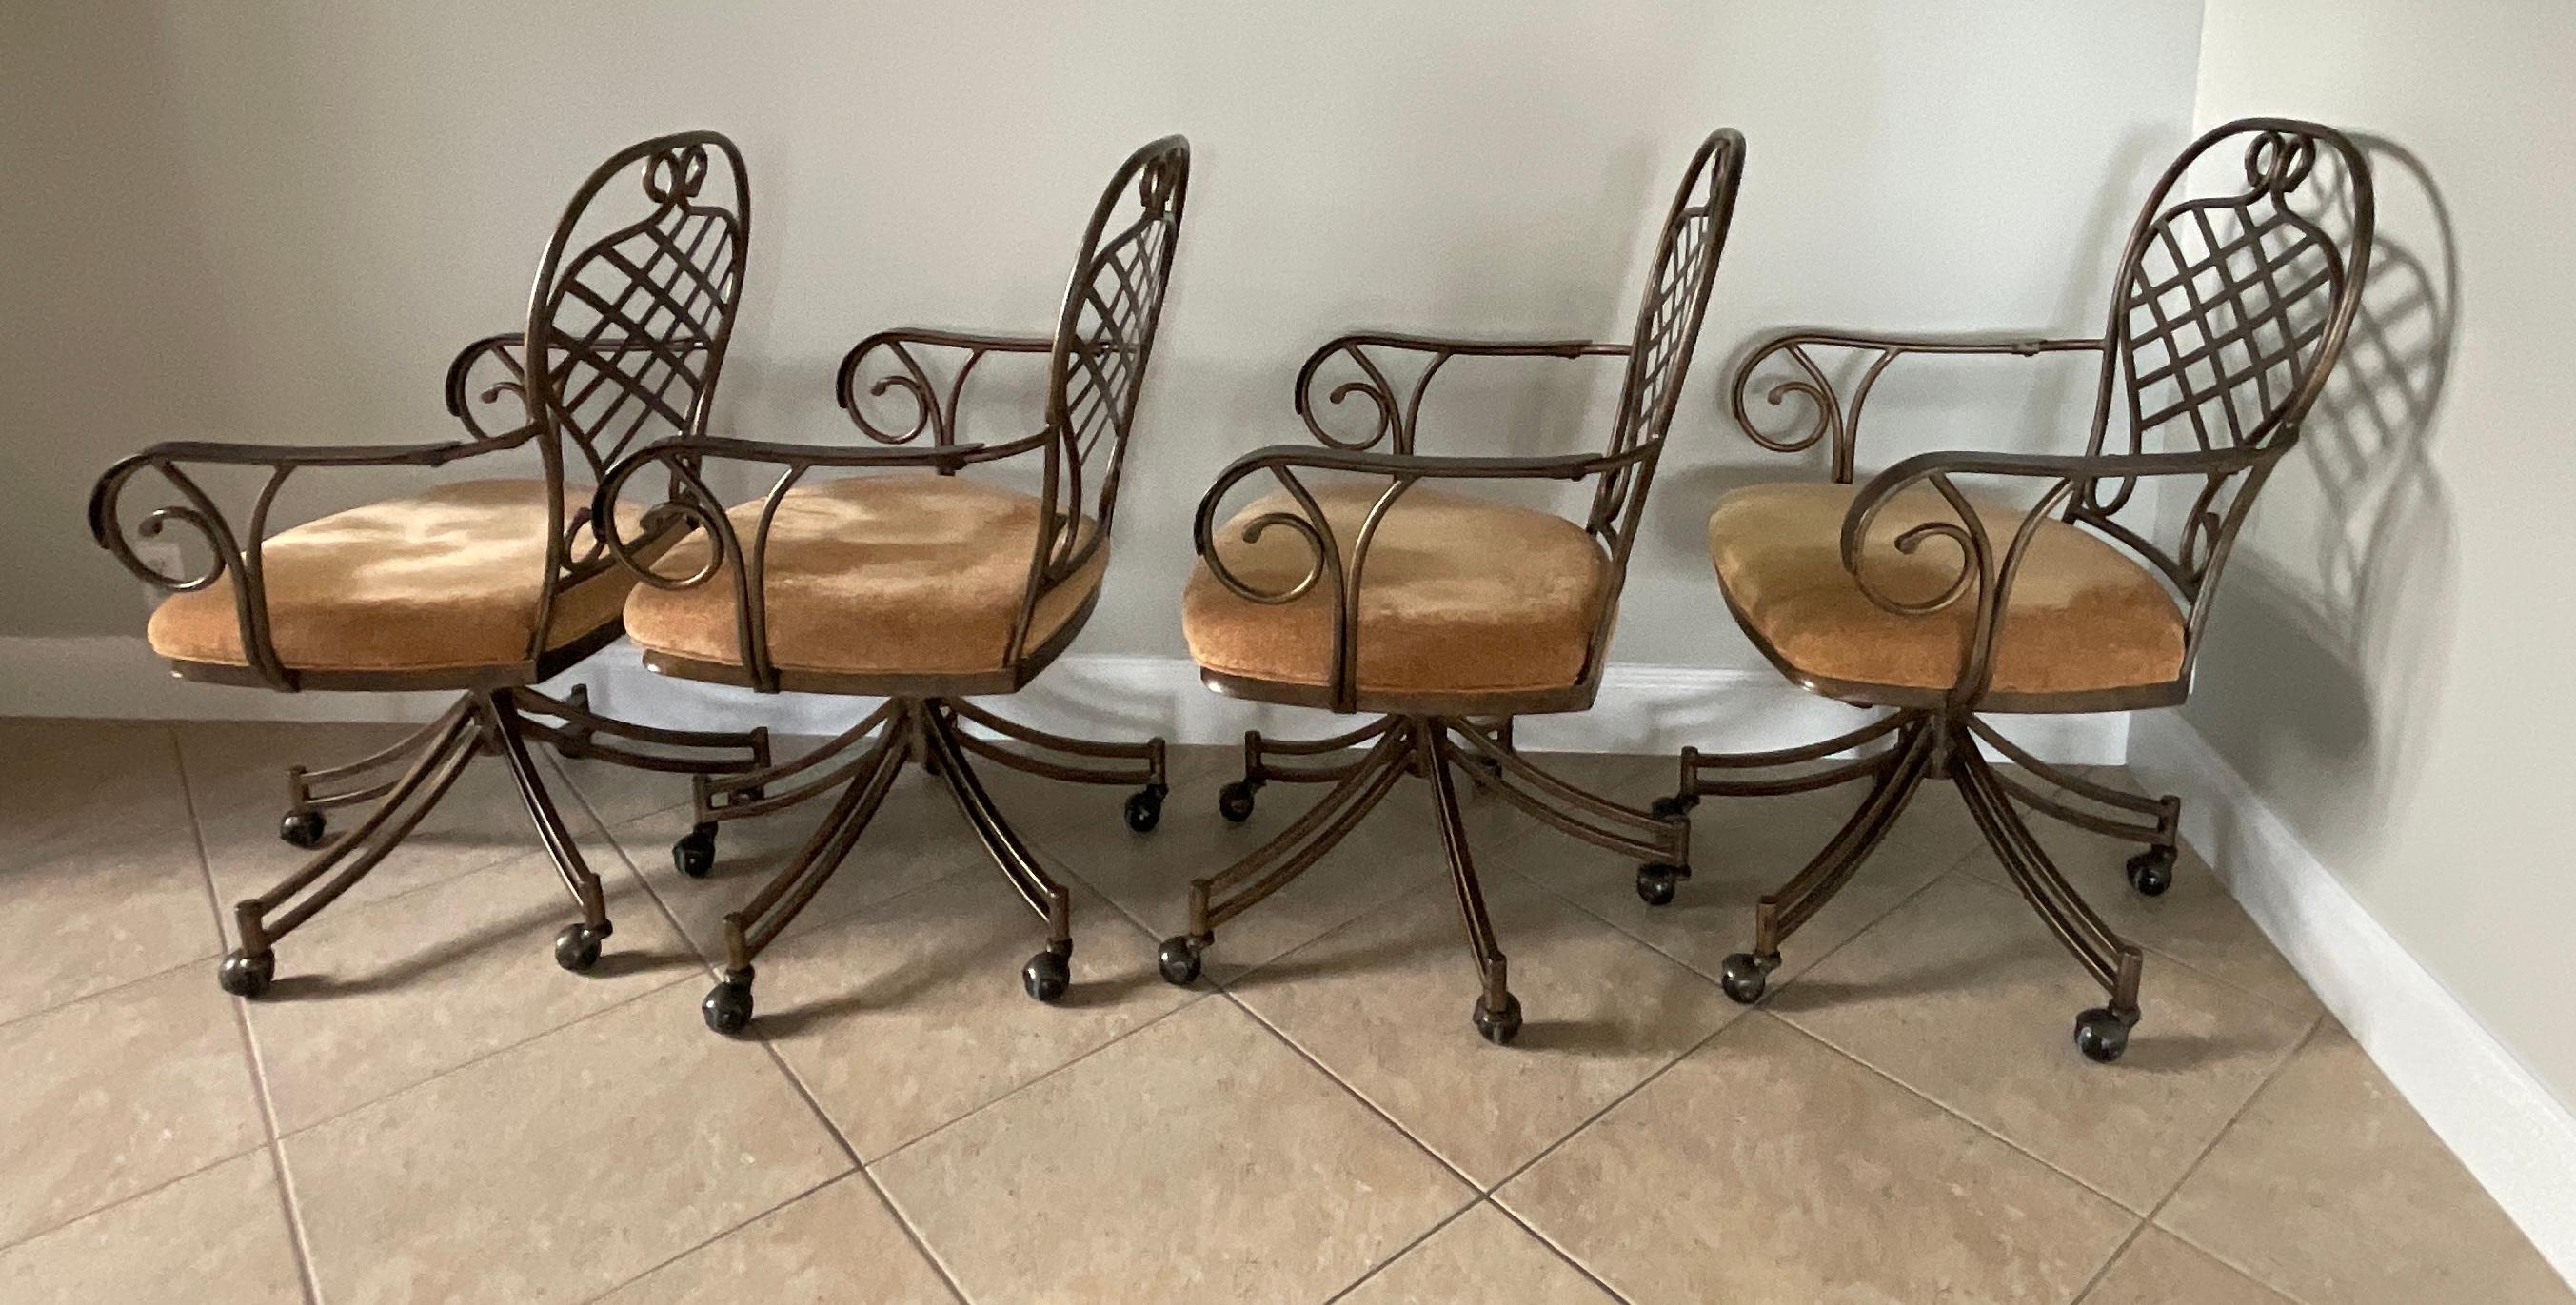 marble top dining table with 4 chairs